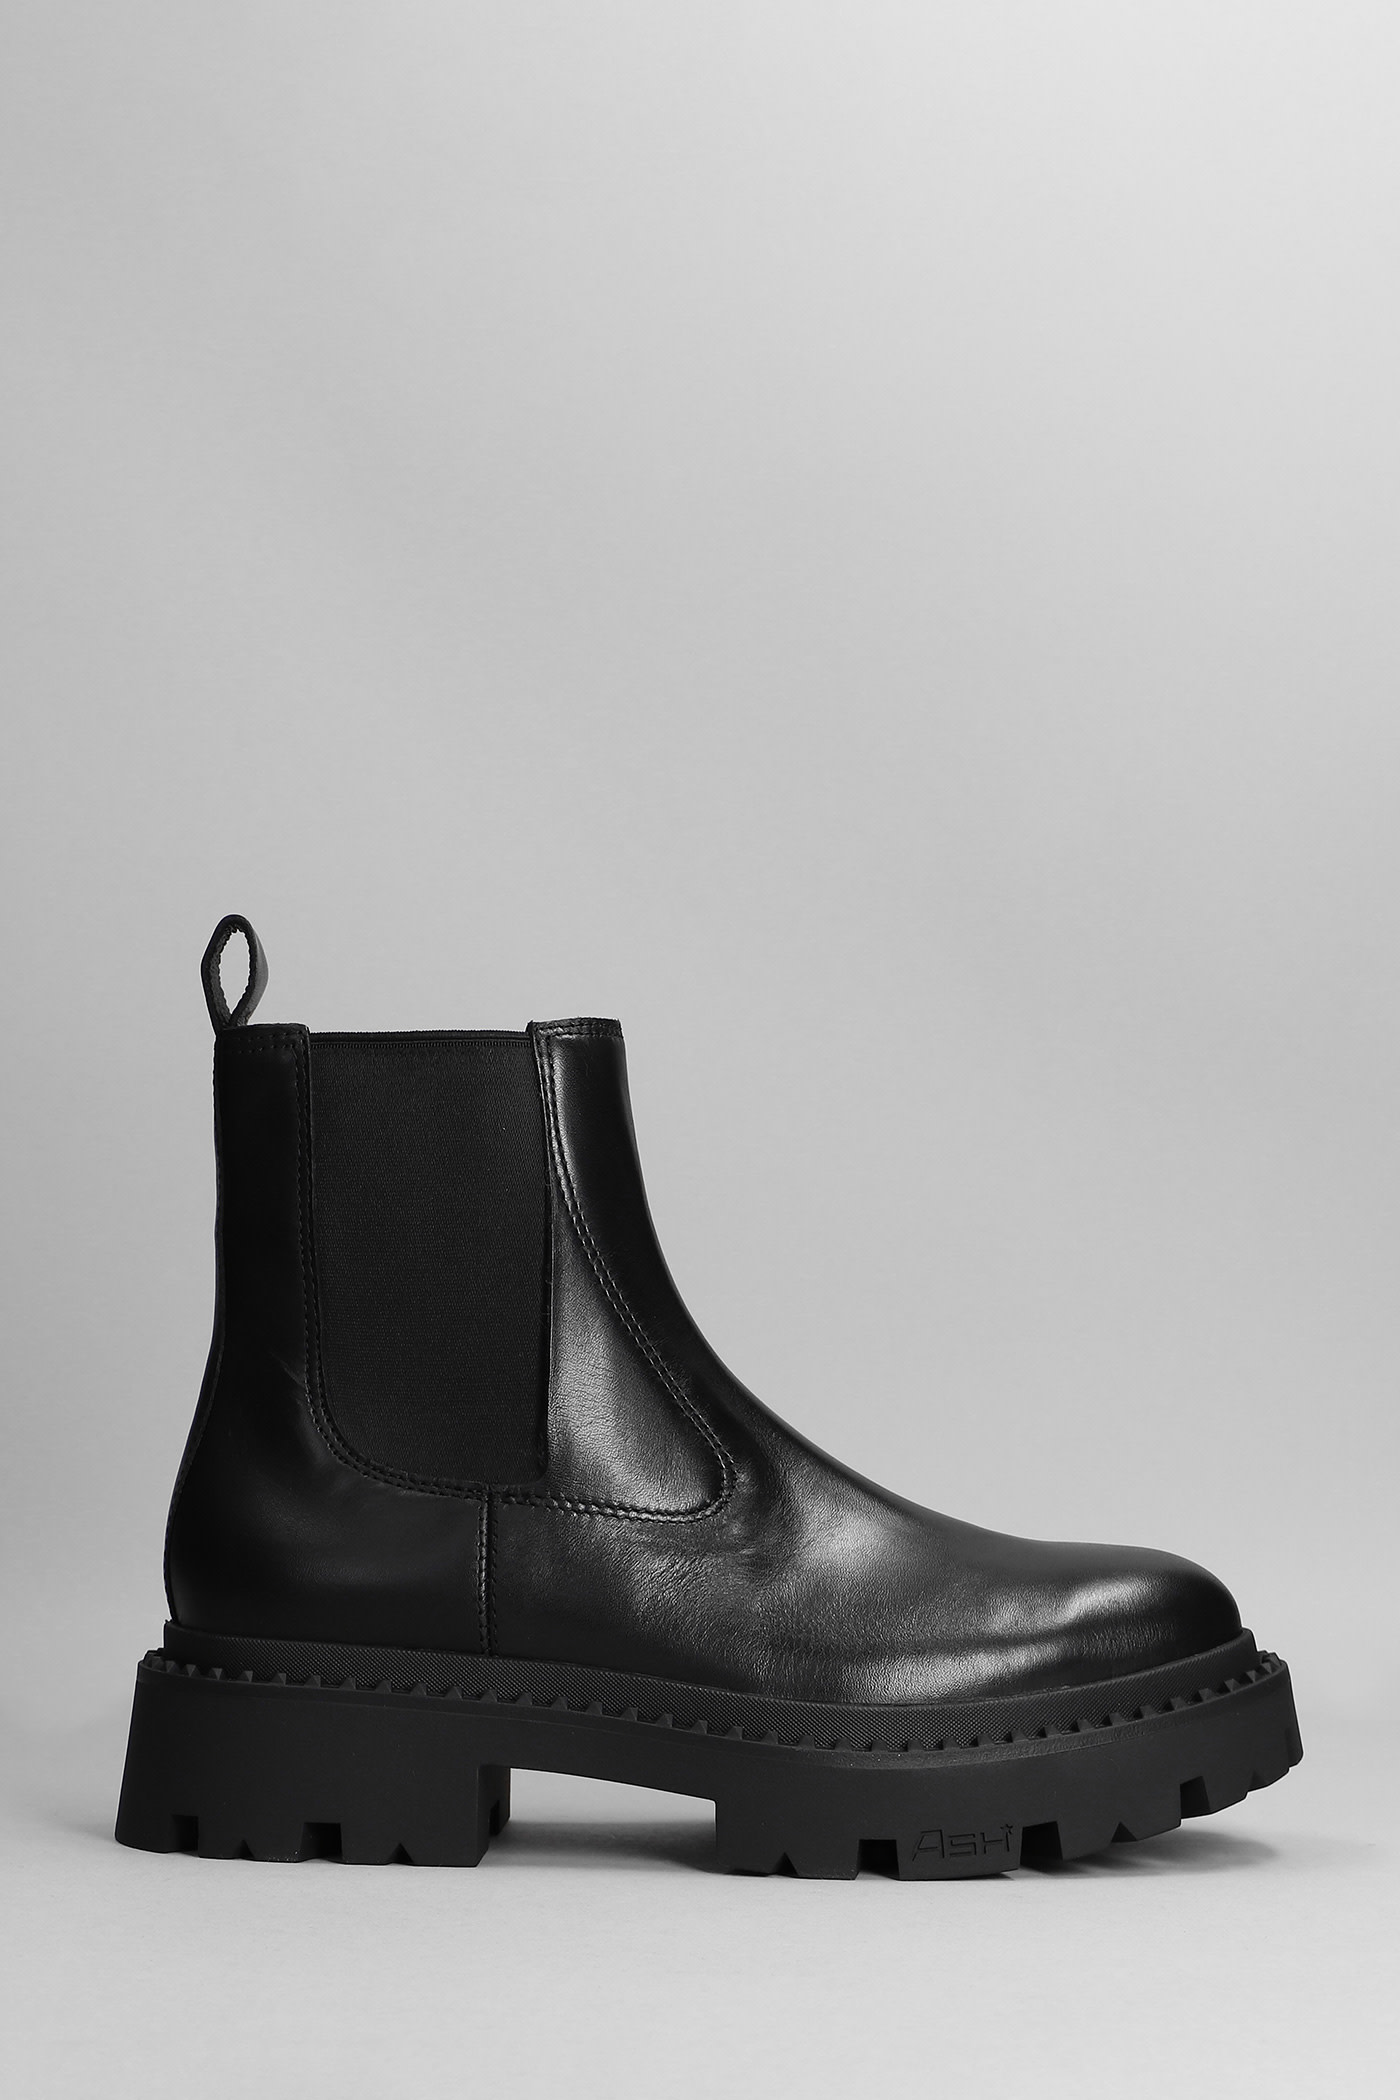 Ash Genesis Combat Boots In Black Leather